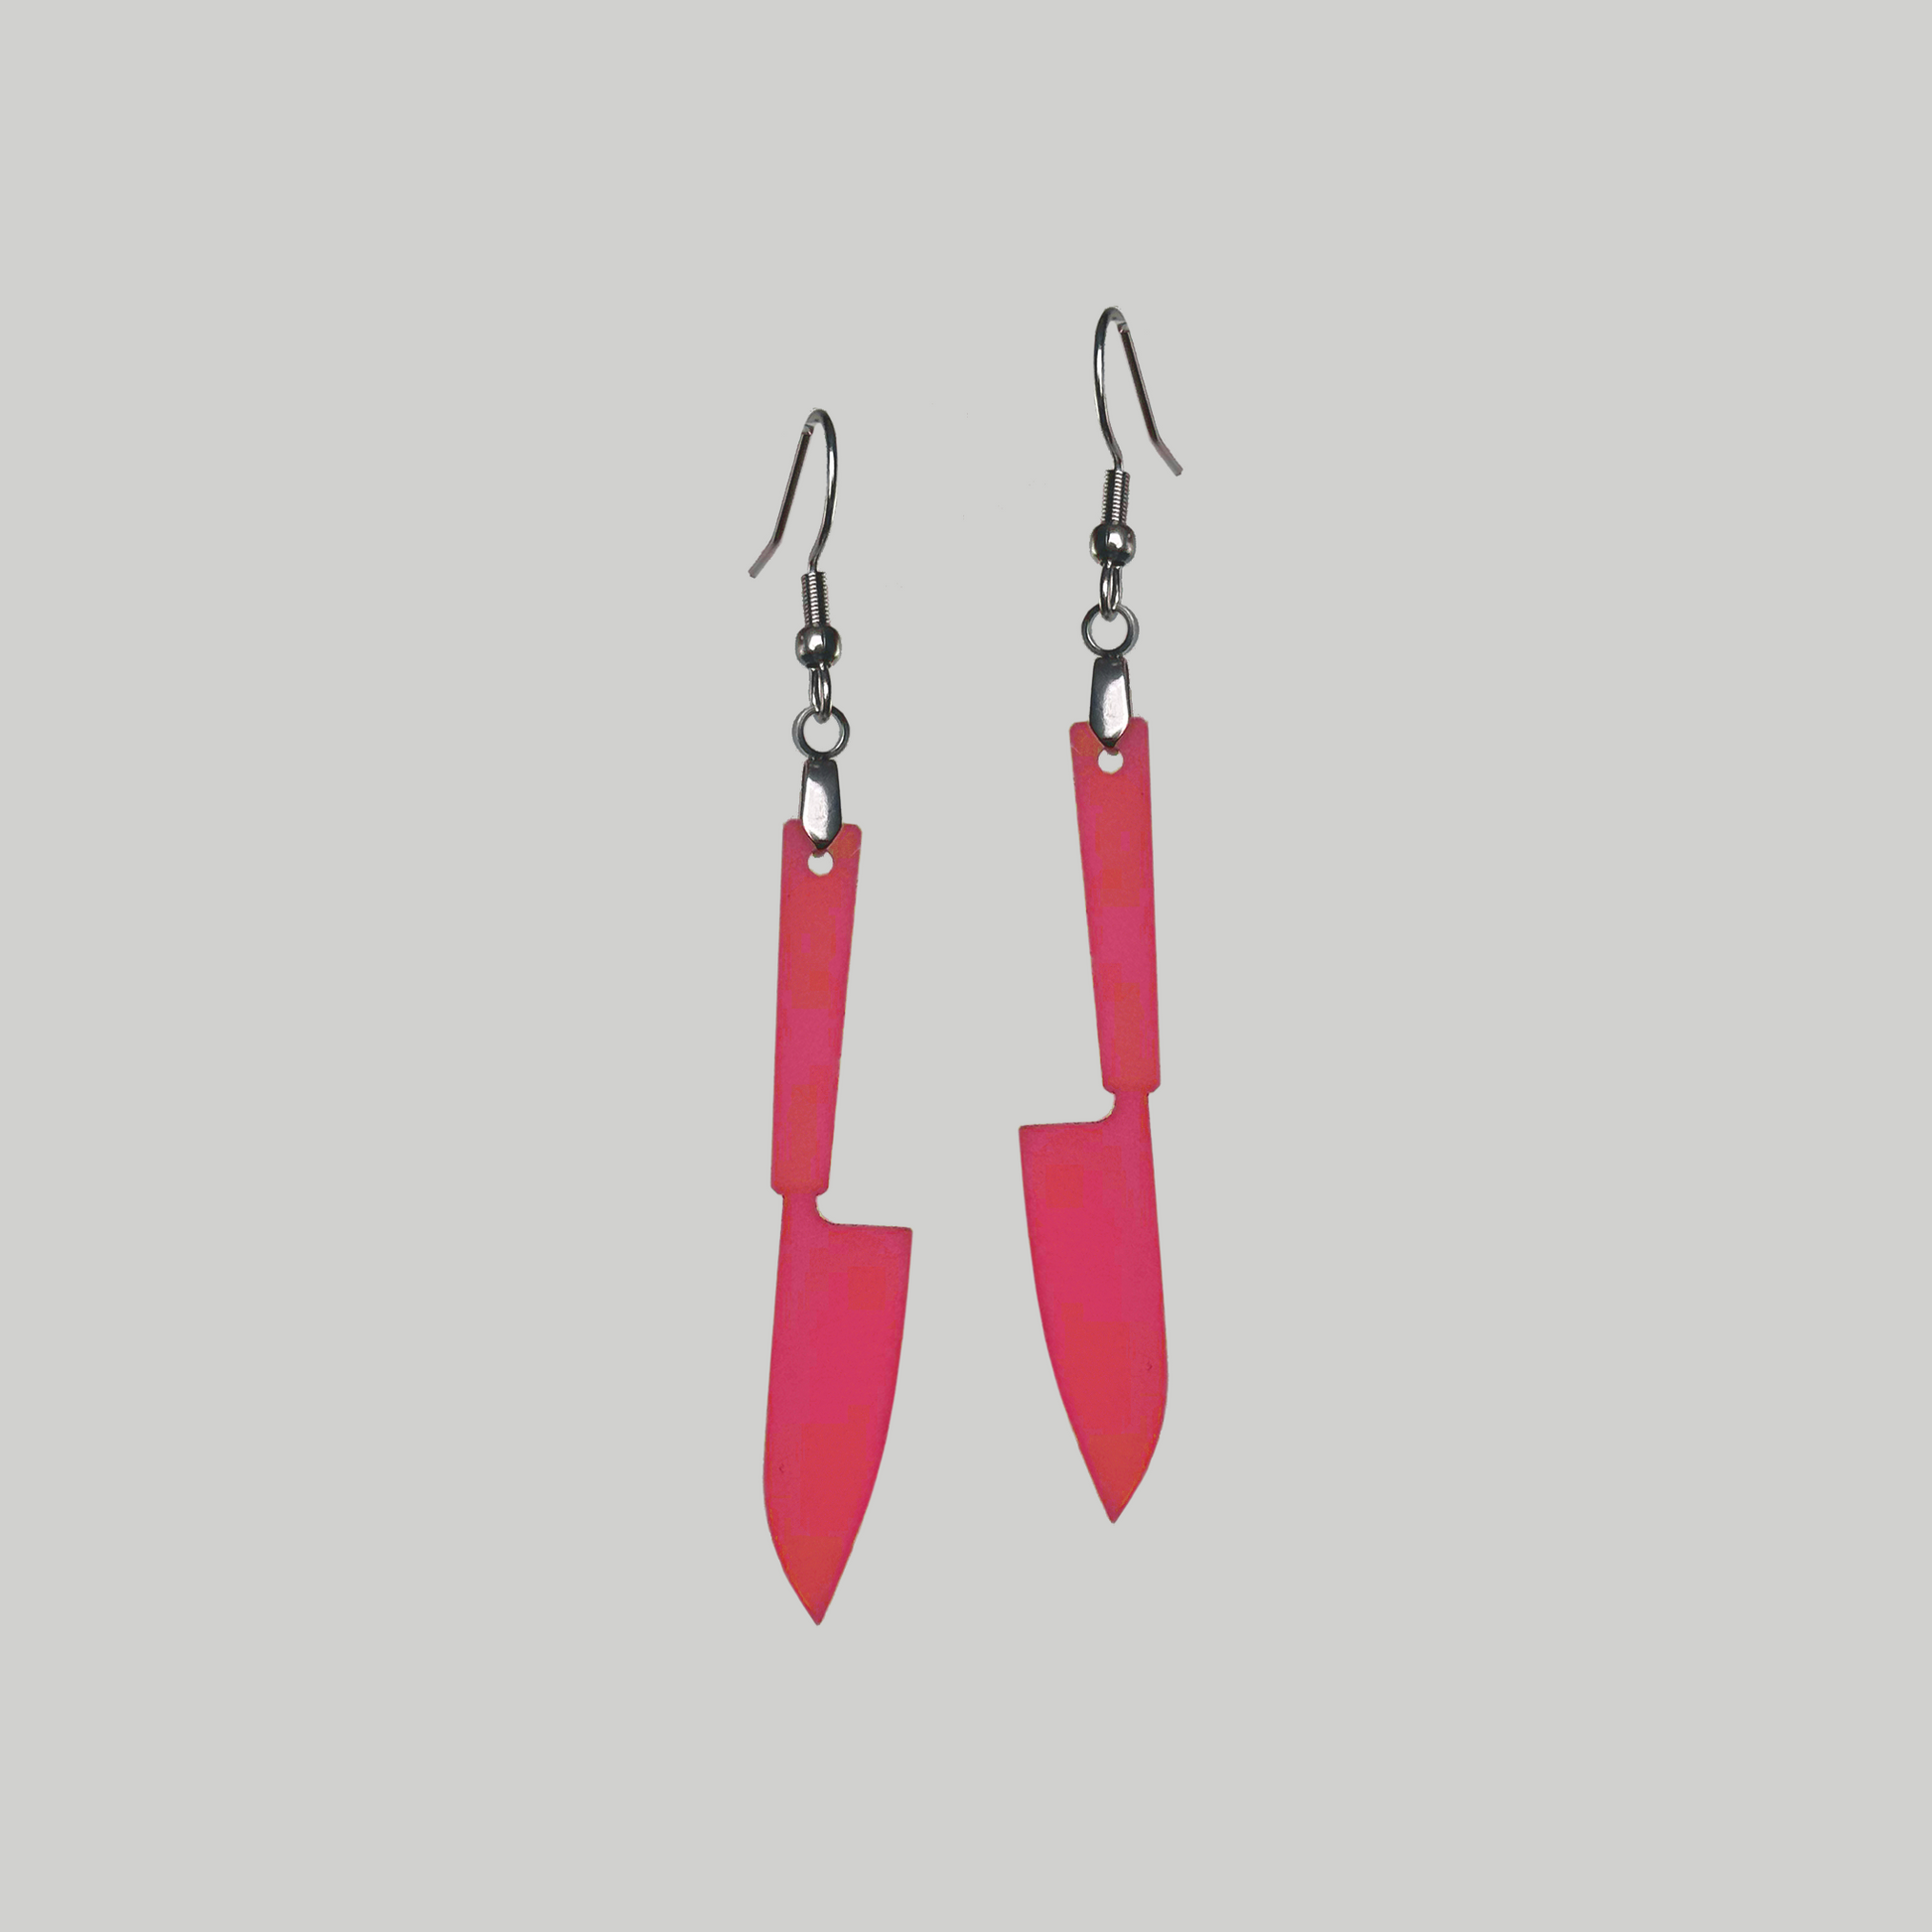 Knife Outline Elegance Earrings: Stylish accessories showcasing miniature knife motifs for a distinctive statement